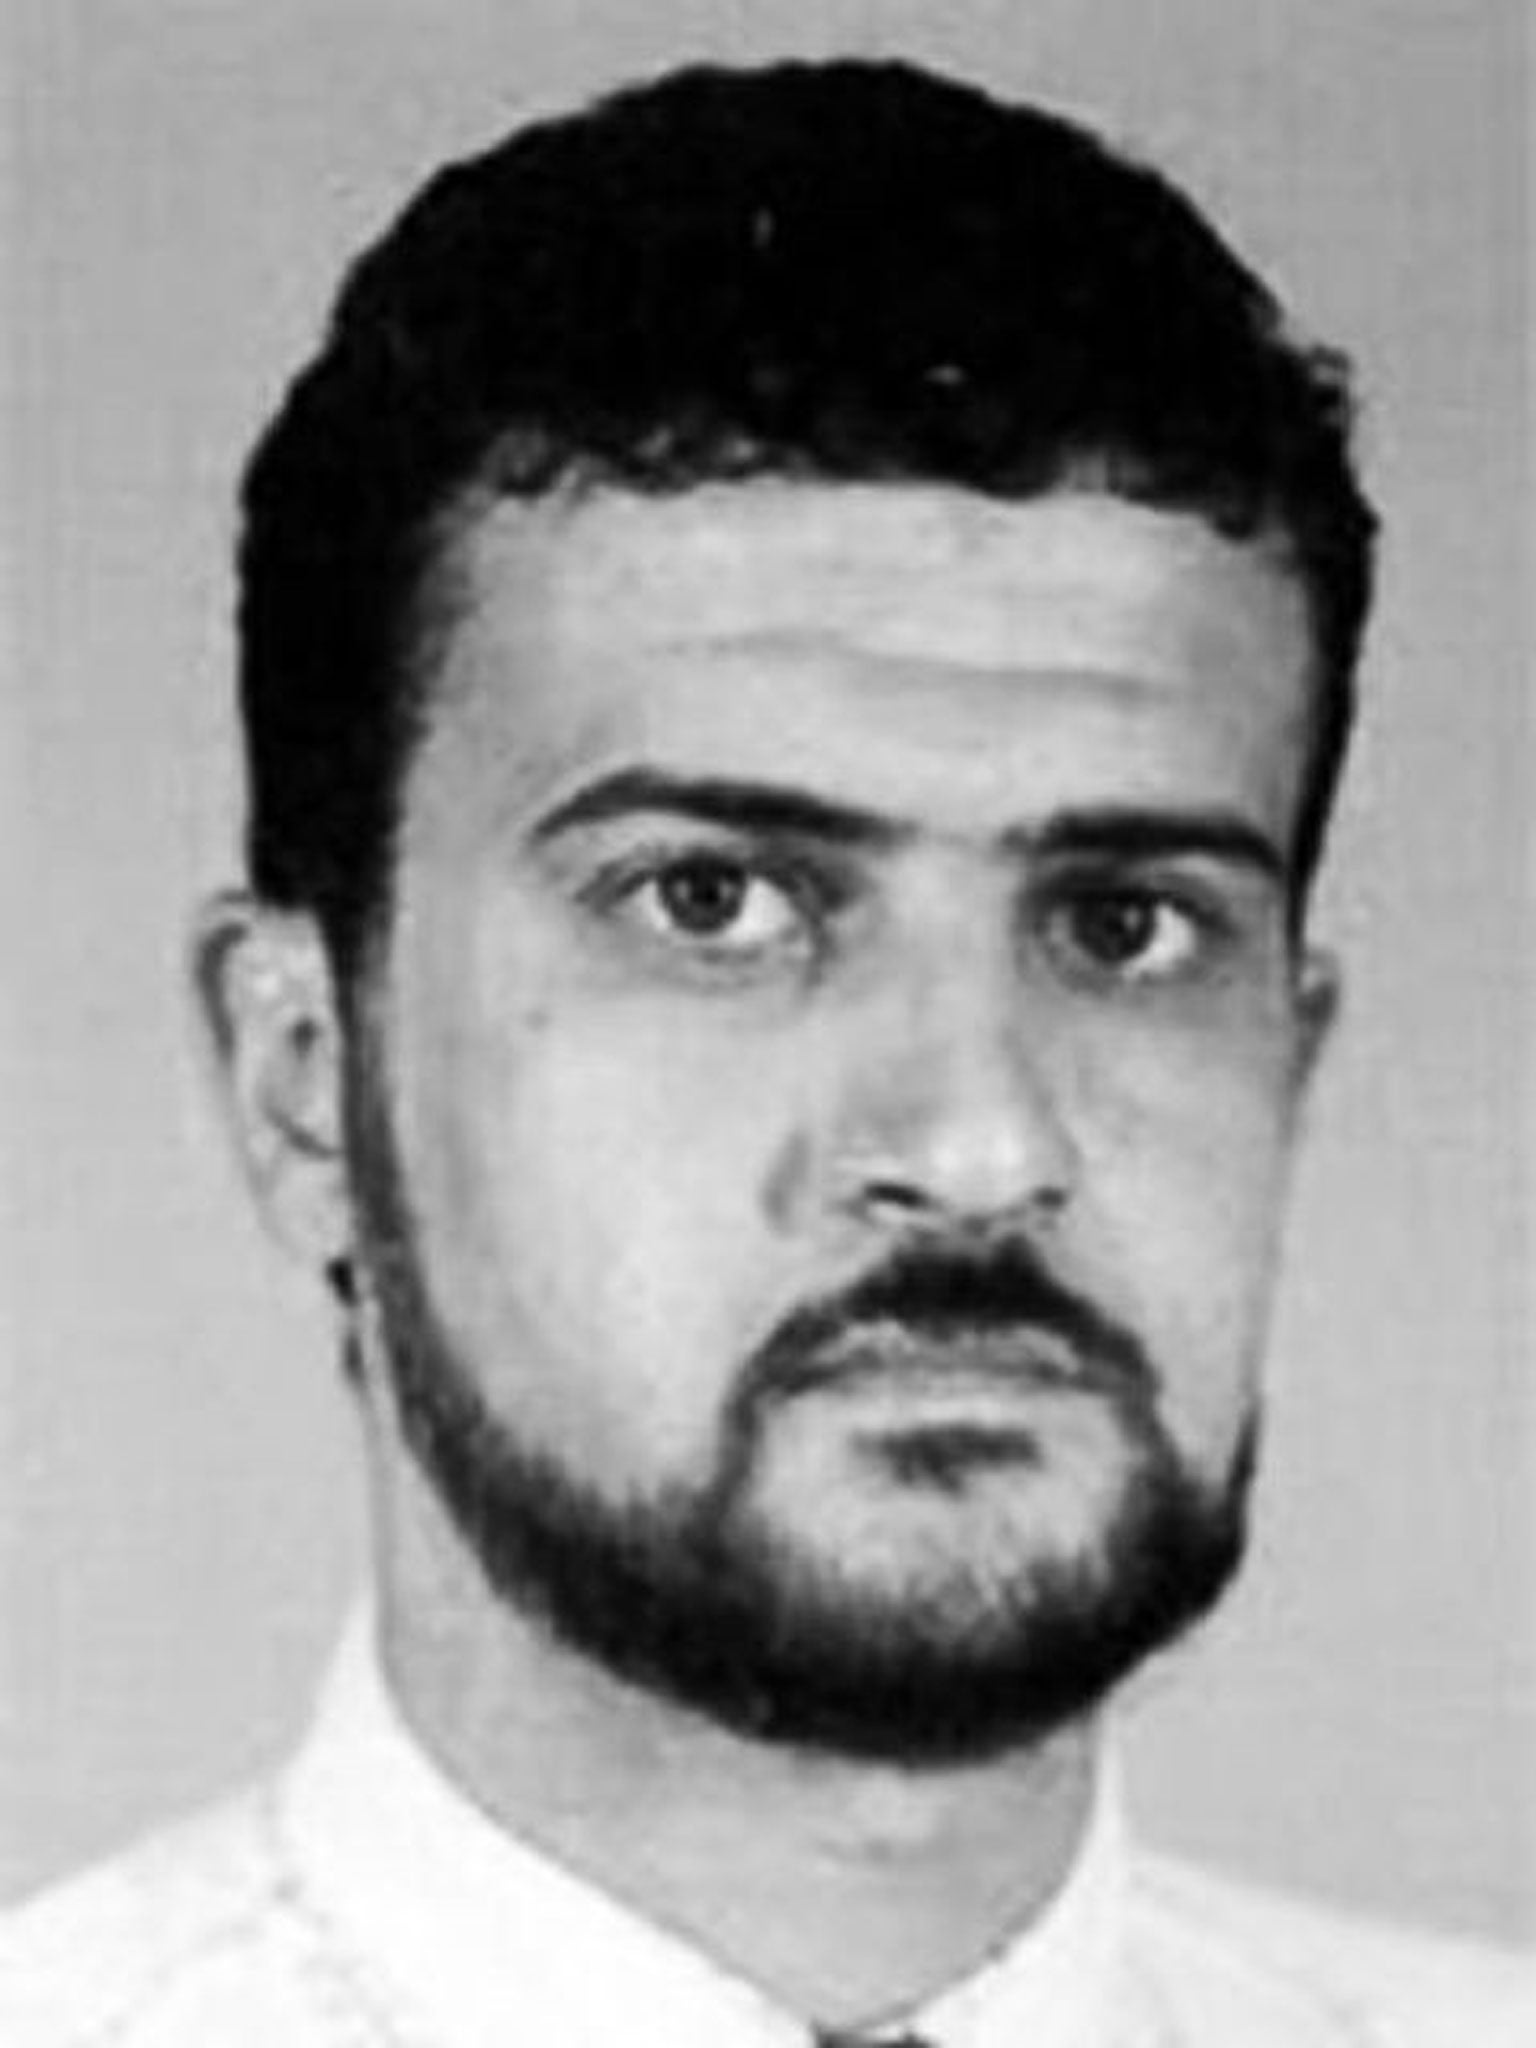 This image from the FBI website shows Anas al-Libi. Gunmen in a three-car convoy have seized the al-Qai'ida leader connected to the 1998 embassy bombings in eastern Africa